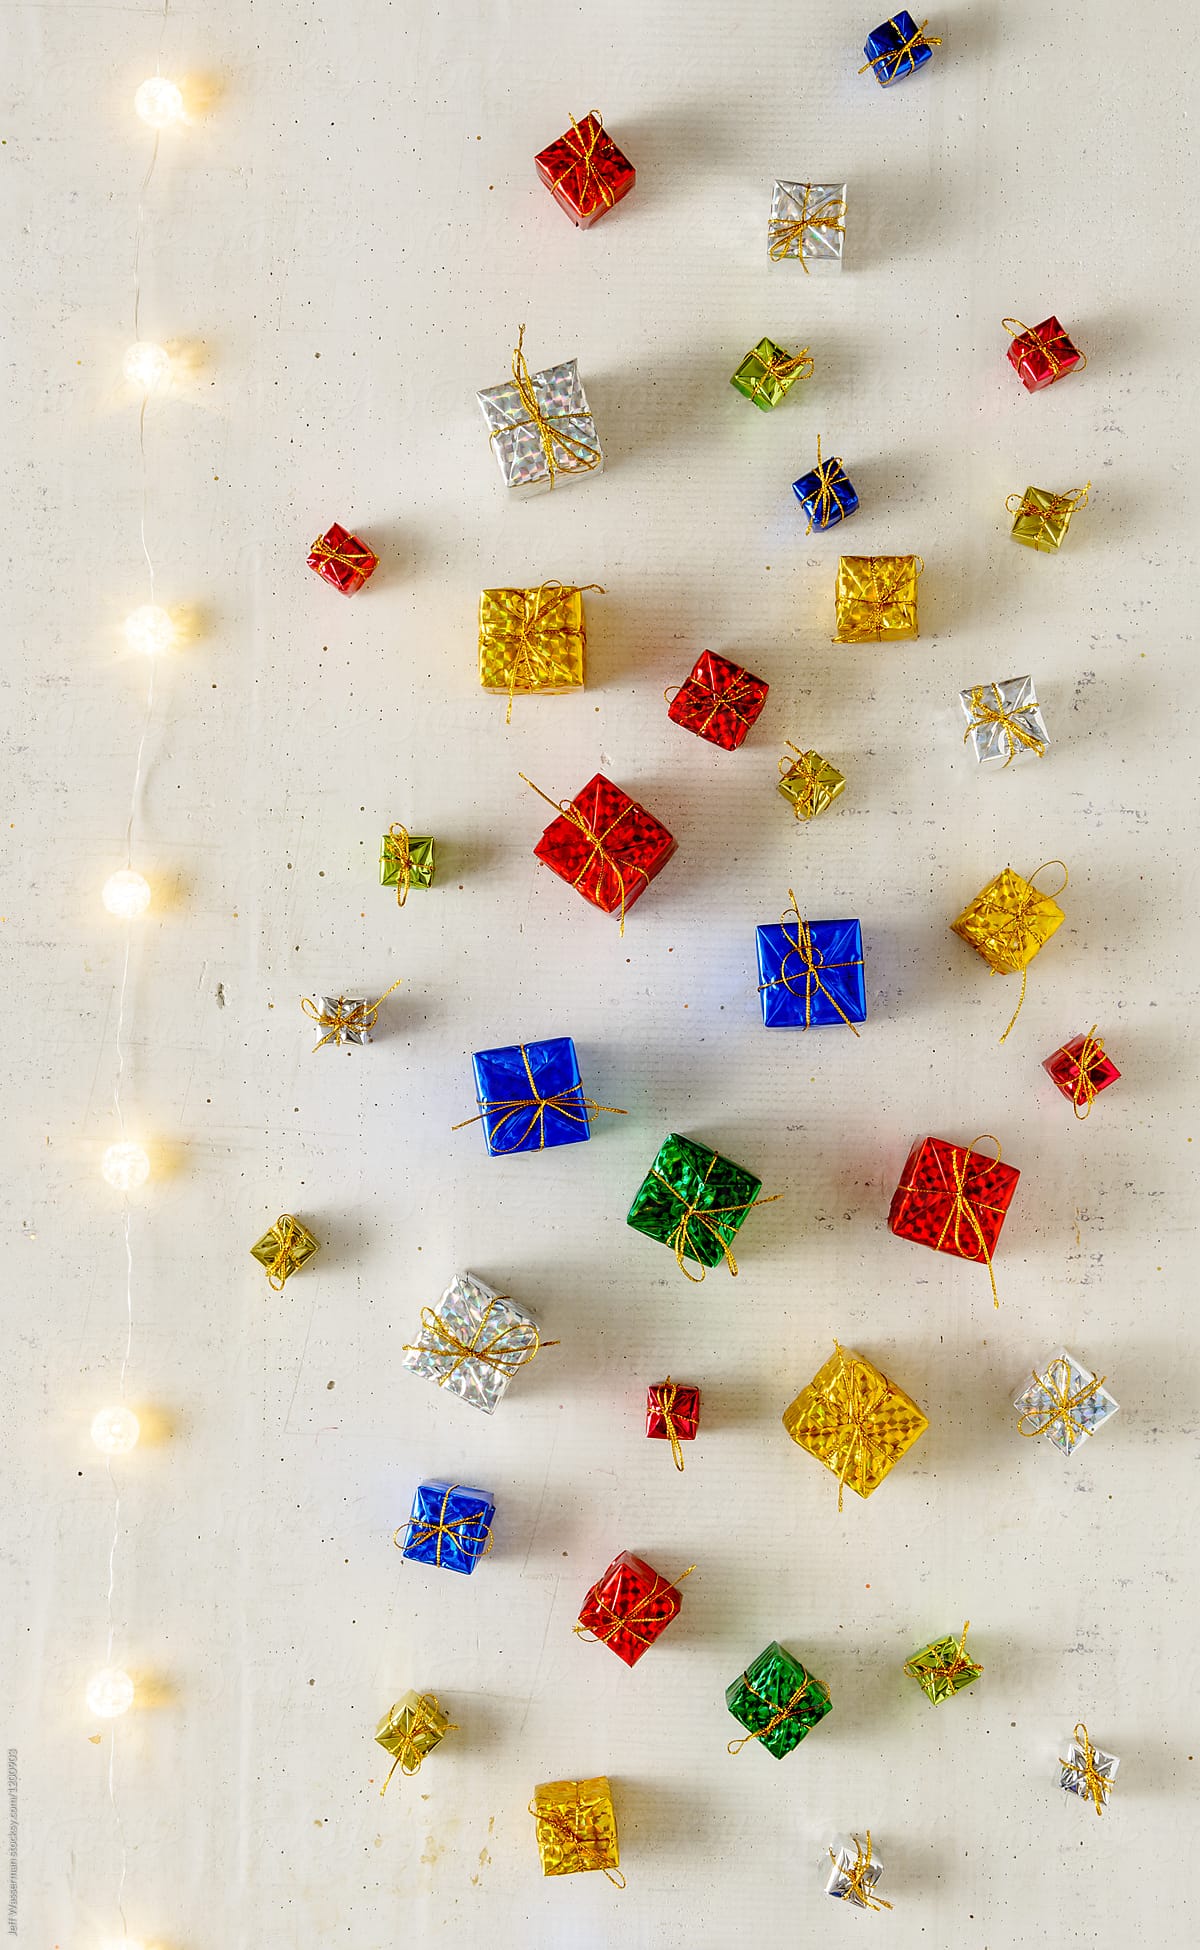 Miniature Christmas Gifts with Lights